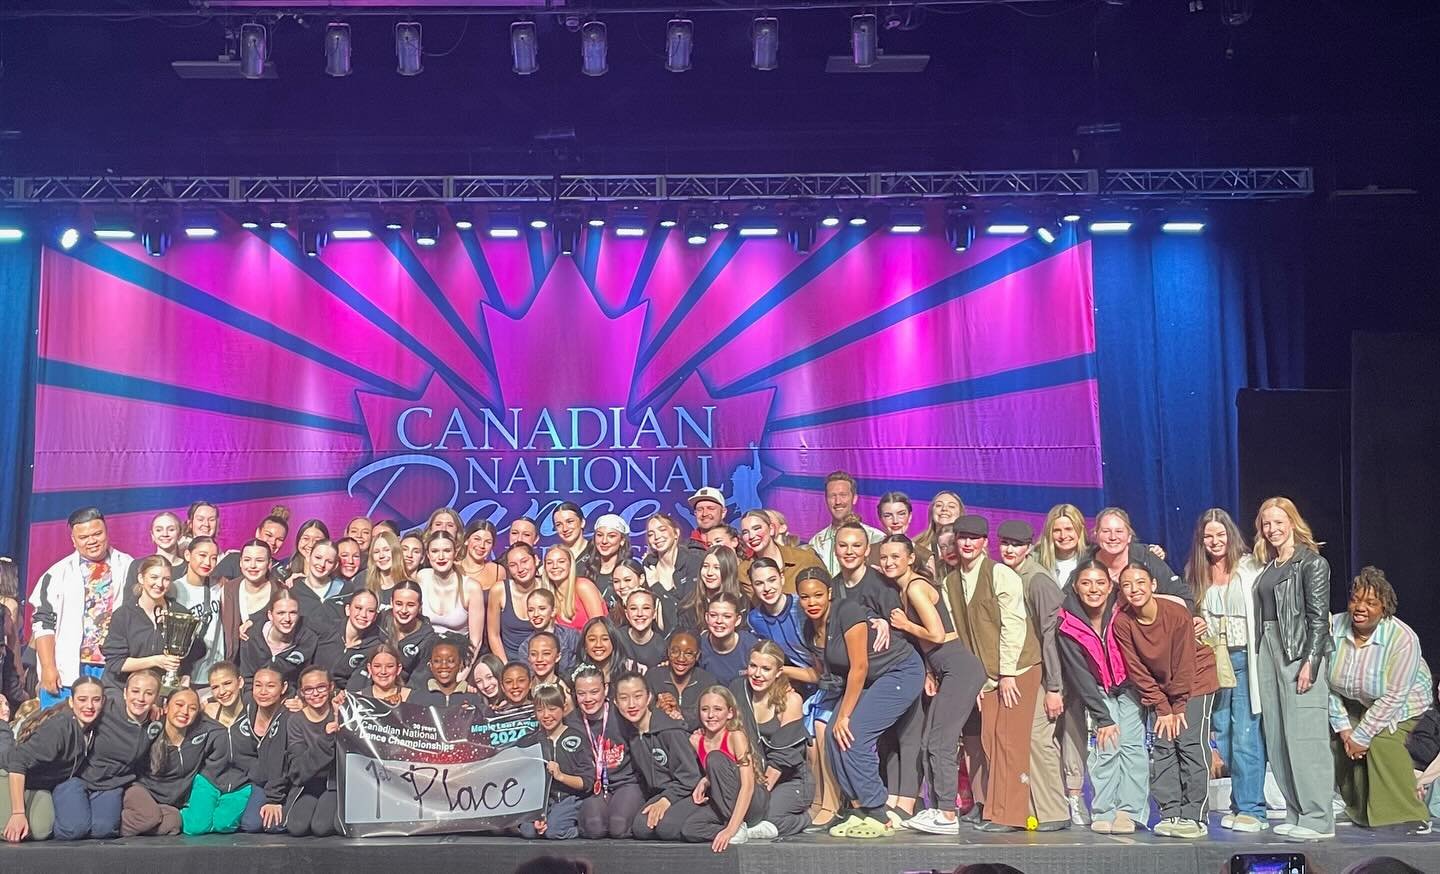 1st place Maple Leaf Trophy from CNDC! 🍁🏆 

Shelley Shearer School of Dance was awarded this prestigious award, which is presented to the highest scoring studio from the competition. 🎉Congratulations to our incomparable team of supportive, driven 